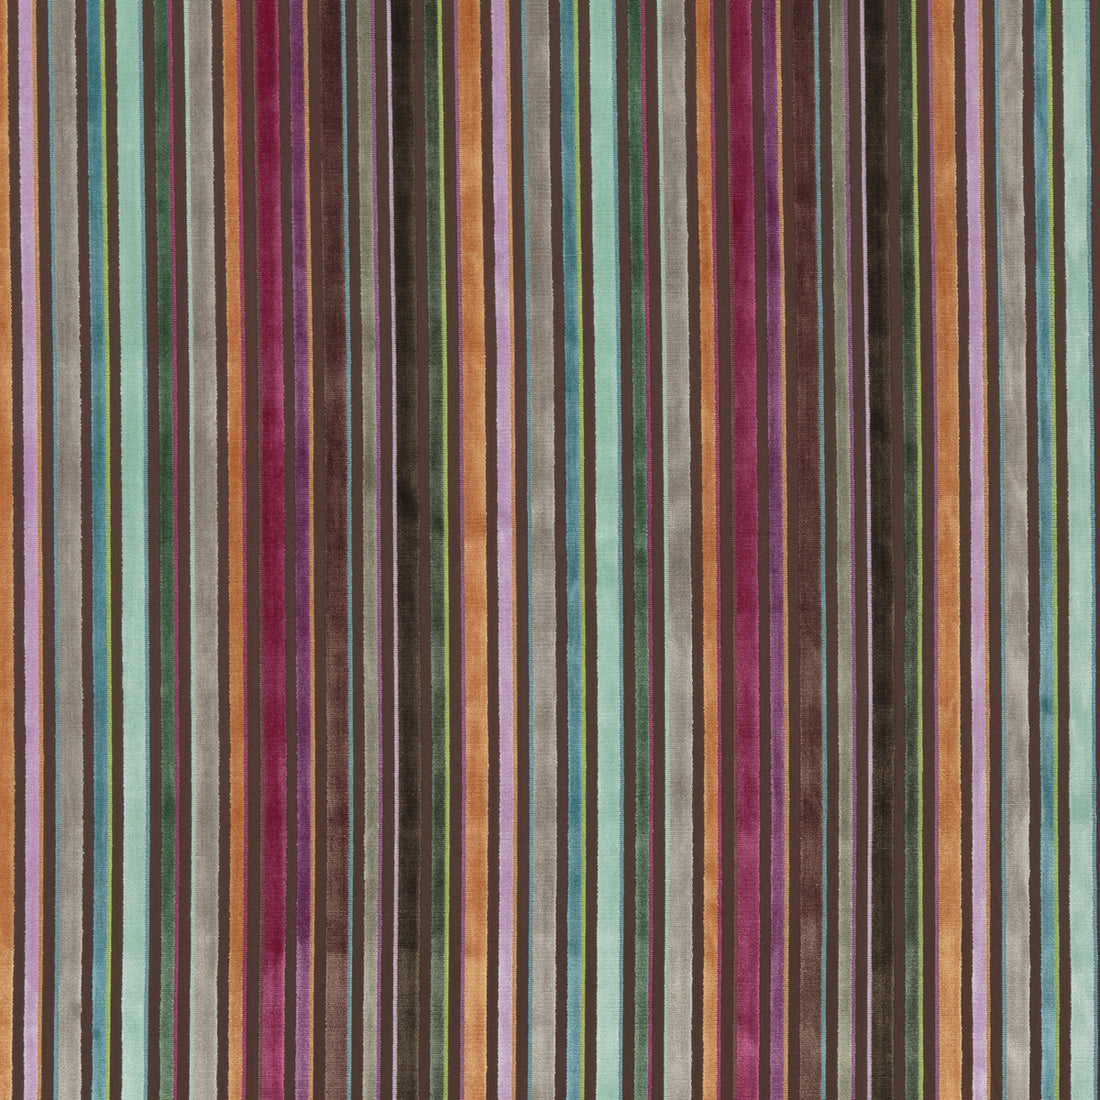 Cardinal Stripe fabric in jewel color - pattern BF10653.1.0 - by G P &amp; J Baker in the Historic Royal Palaces collection